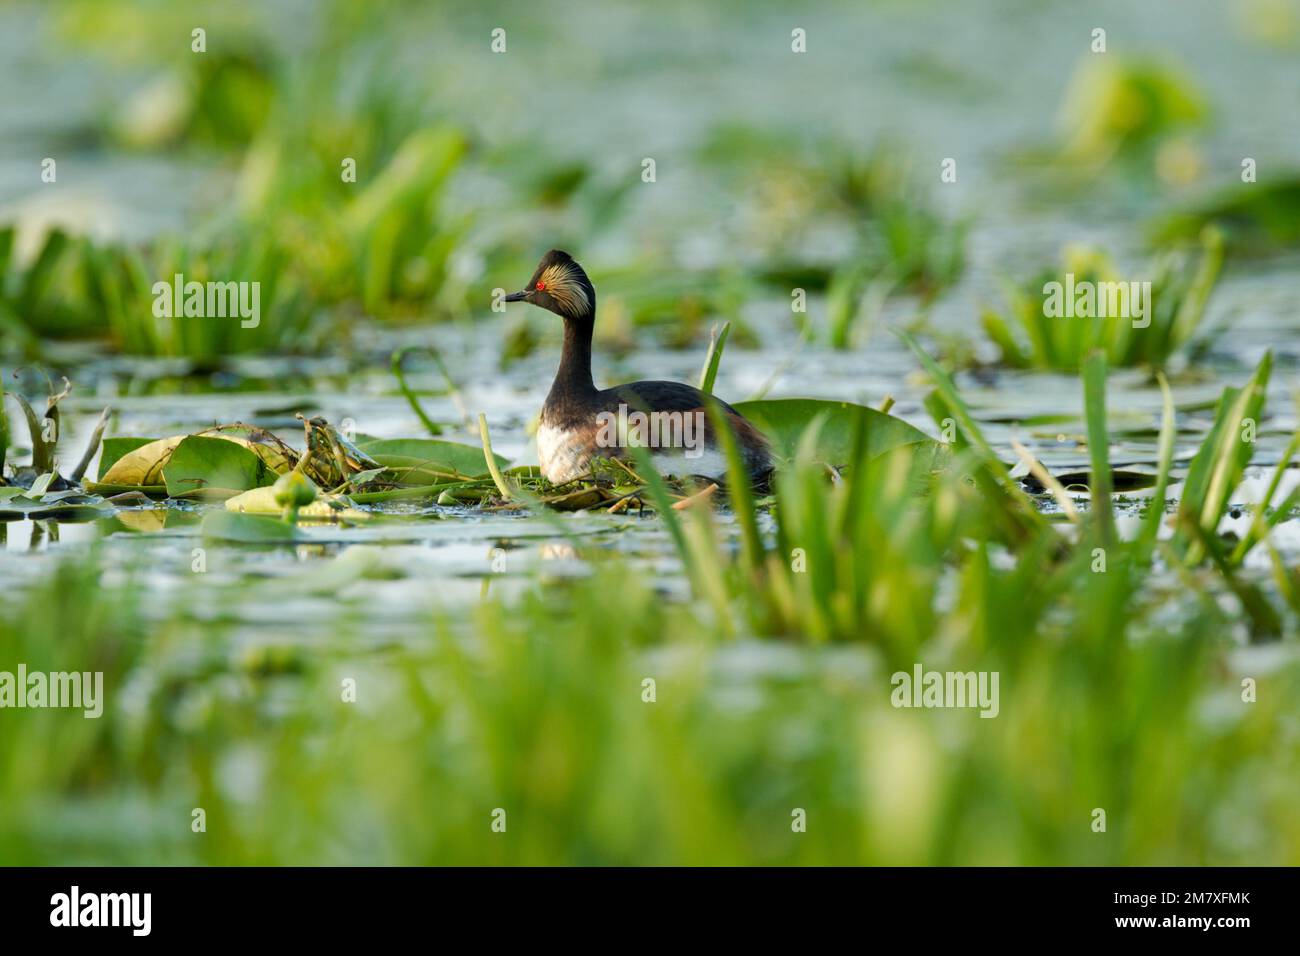 Black-necked grebe also known as eared grebe (Podiceps nigricollis) sitting on its nest built on lilly leaves and other vegetation Stock Photo